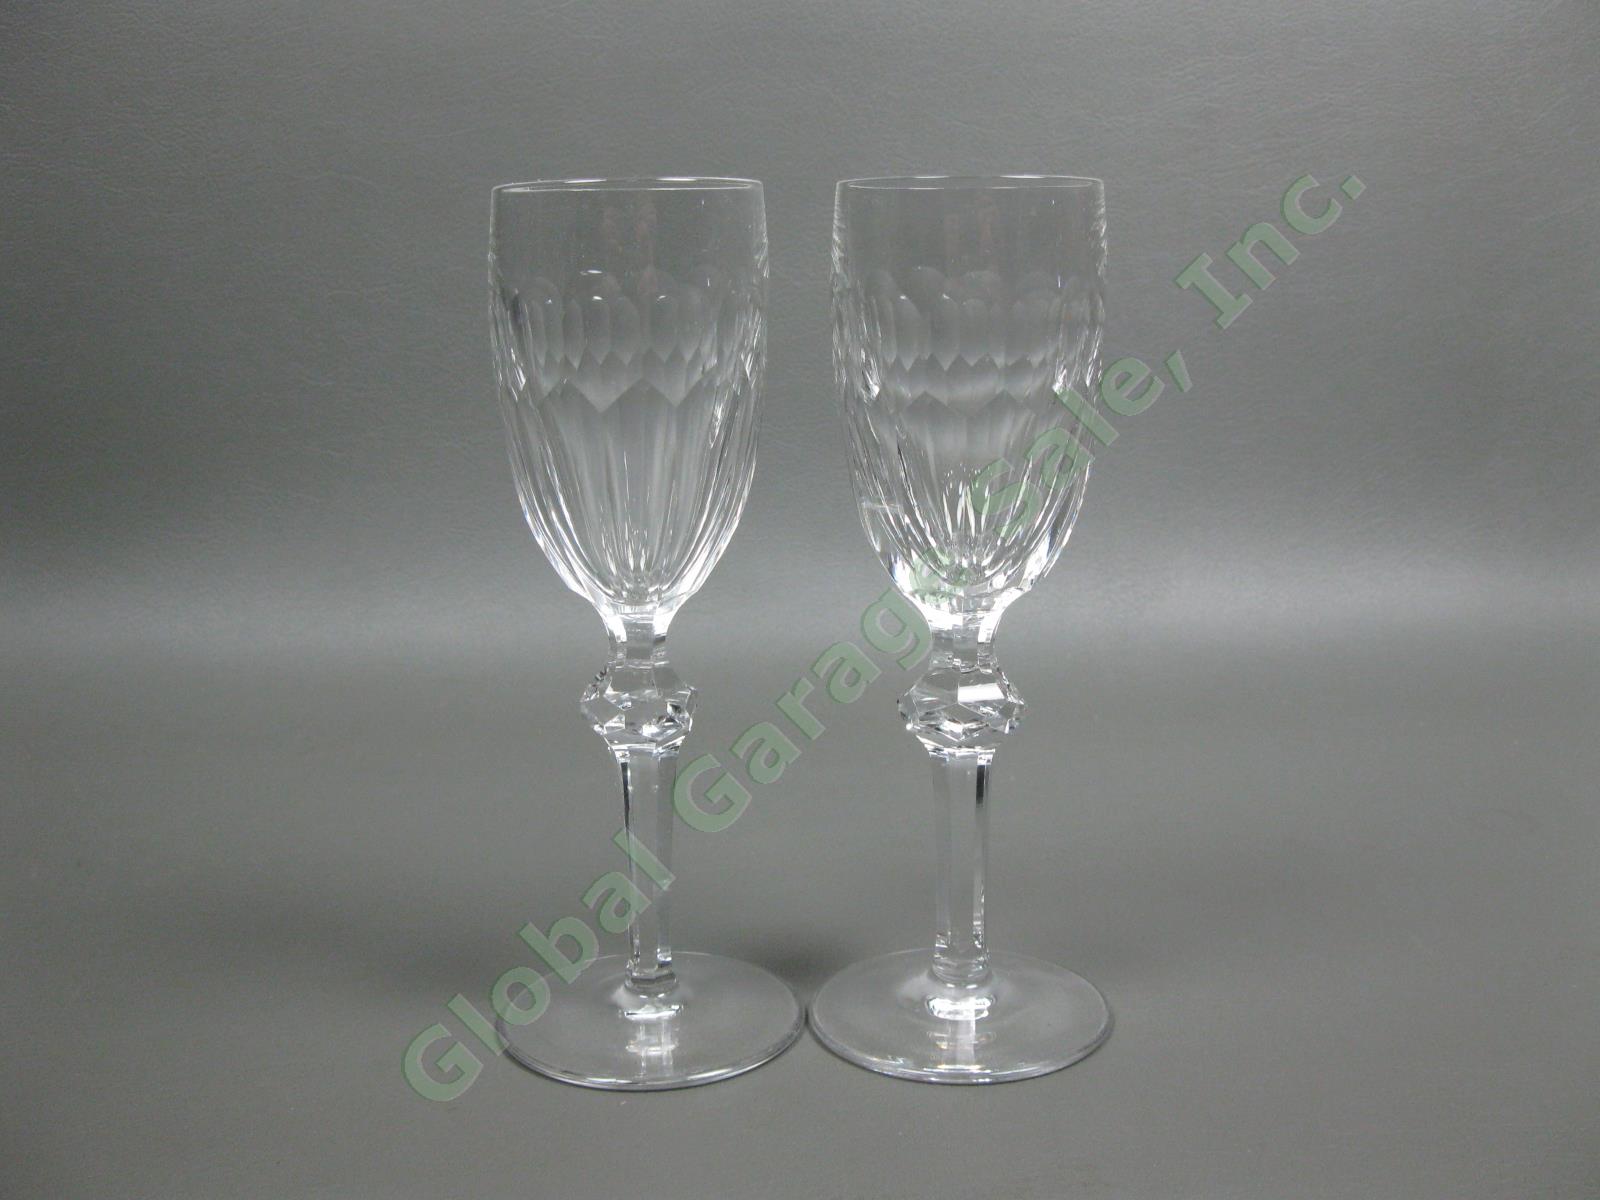 6 Waterford Crystal Curraghmore Sherry Wine Glasses Ireland Blown Cut Glass Set 2